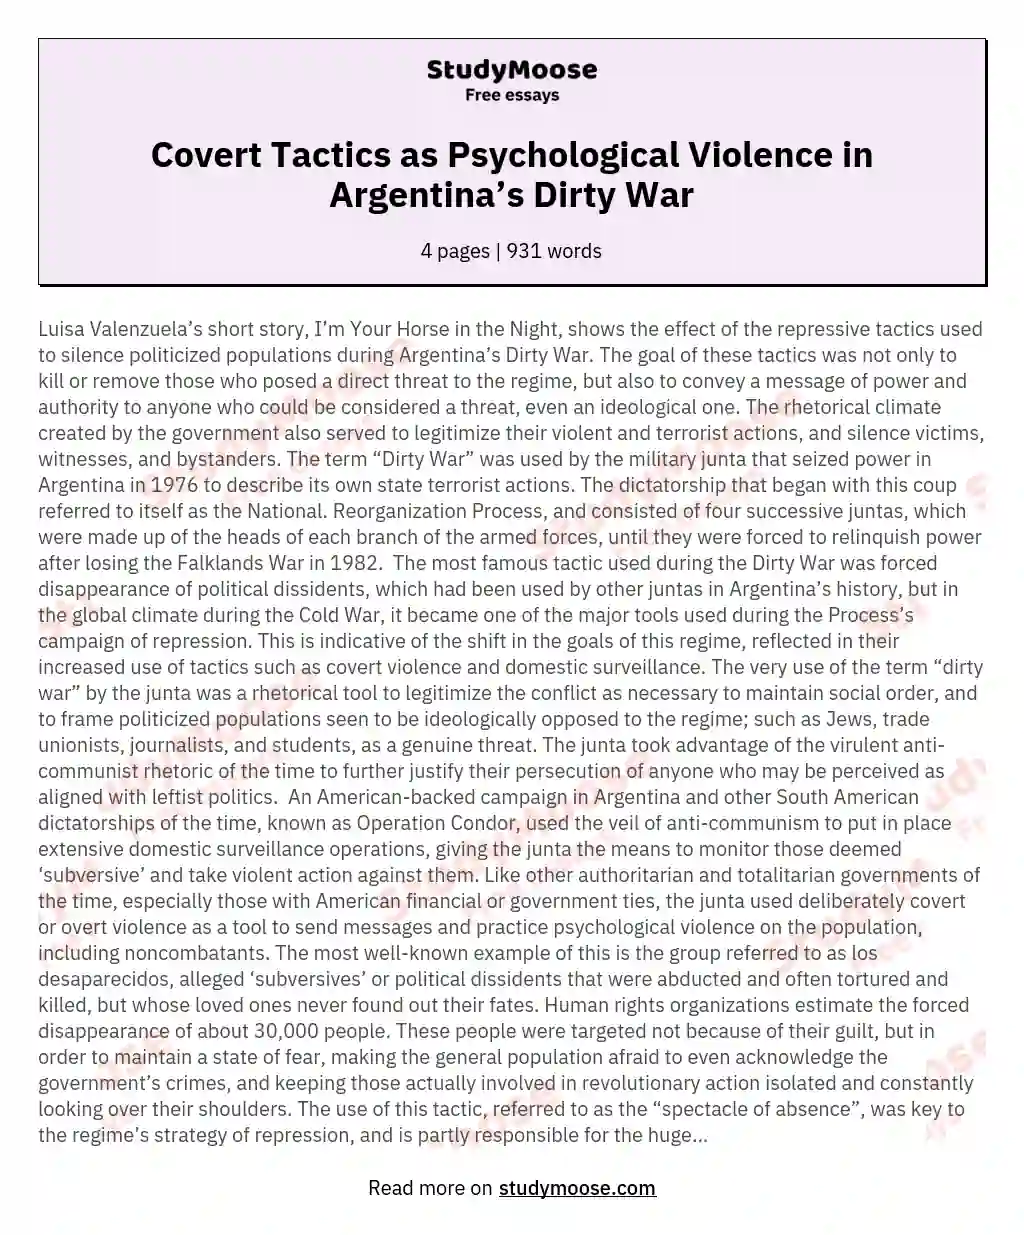 Covert Tactics as Psychological Violence in Argentina’s Dirty War essay